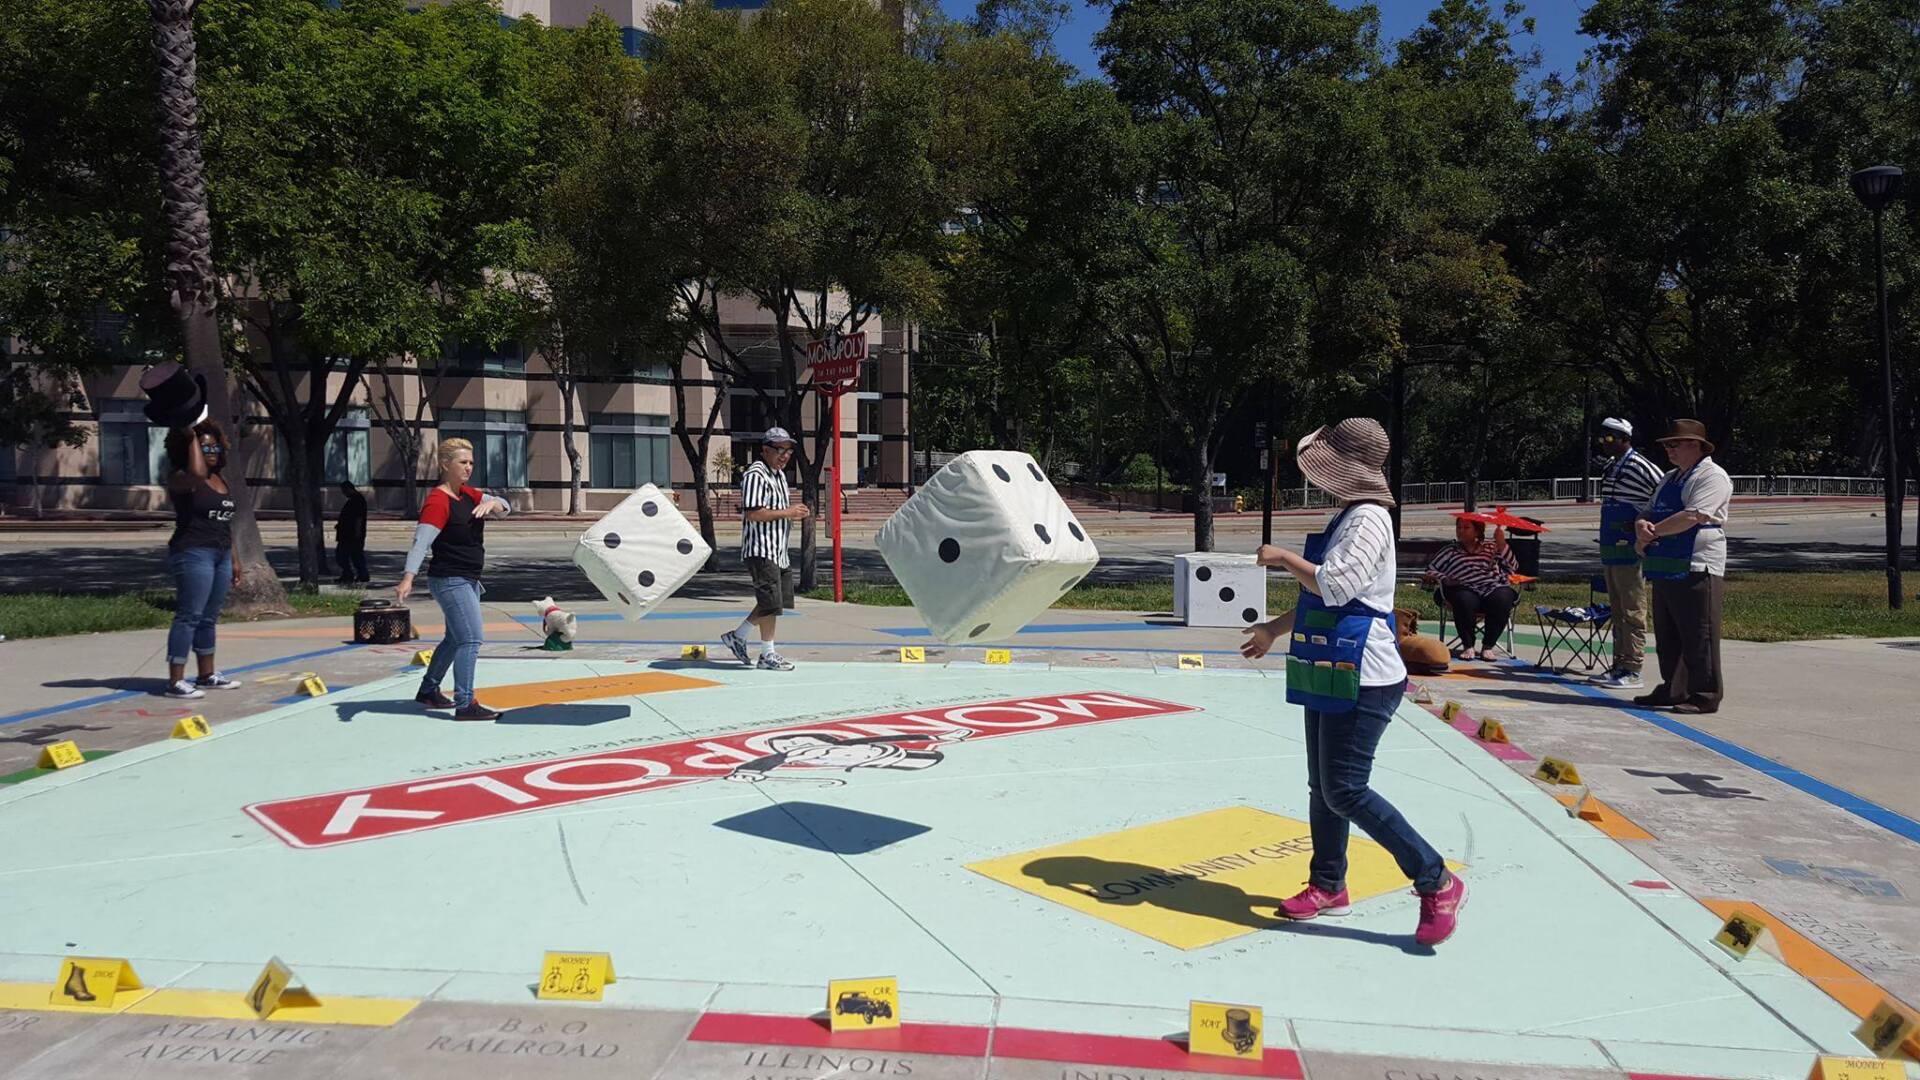 World's Largest Monopoly Board Sculpture: world record set in San Jose, California